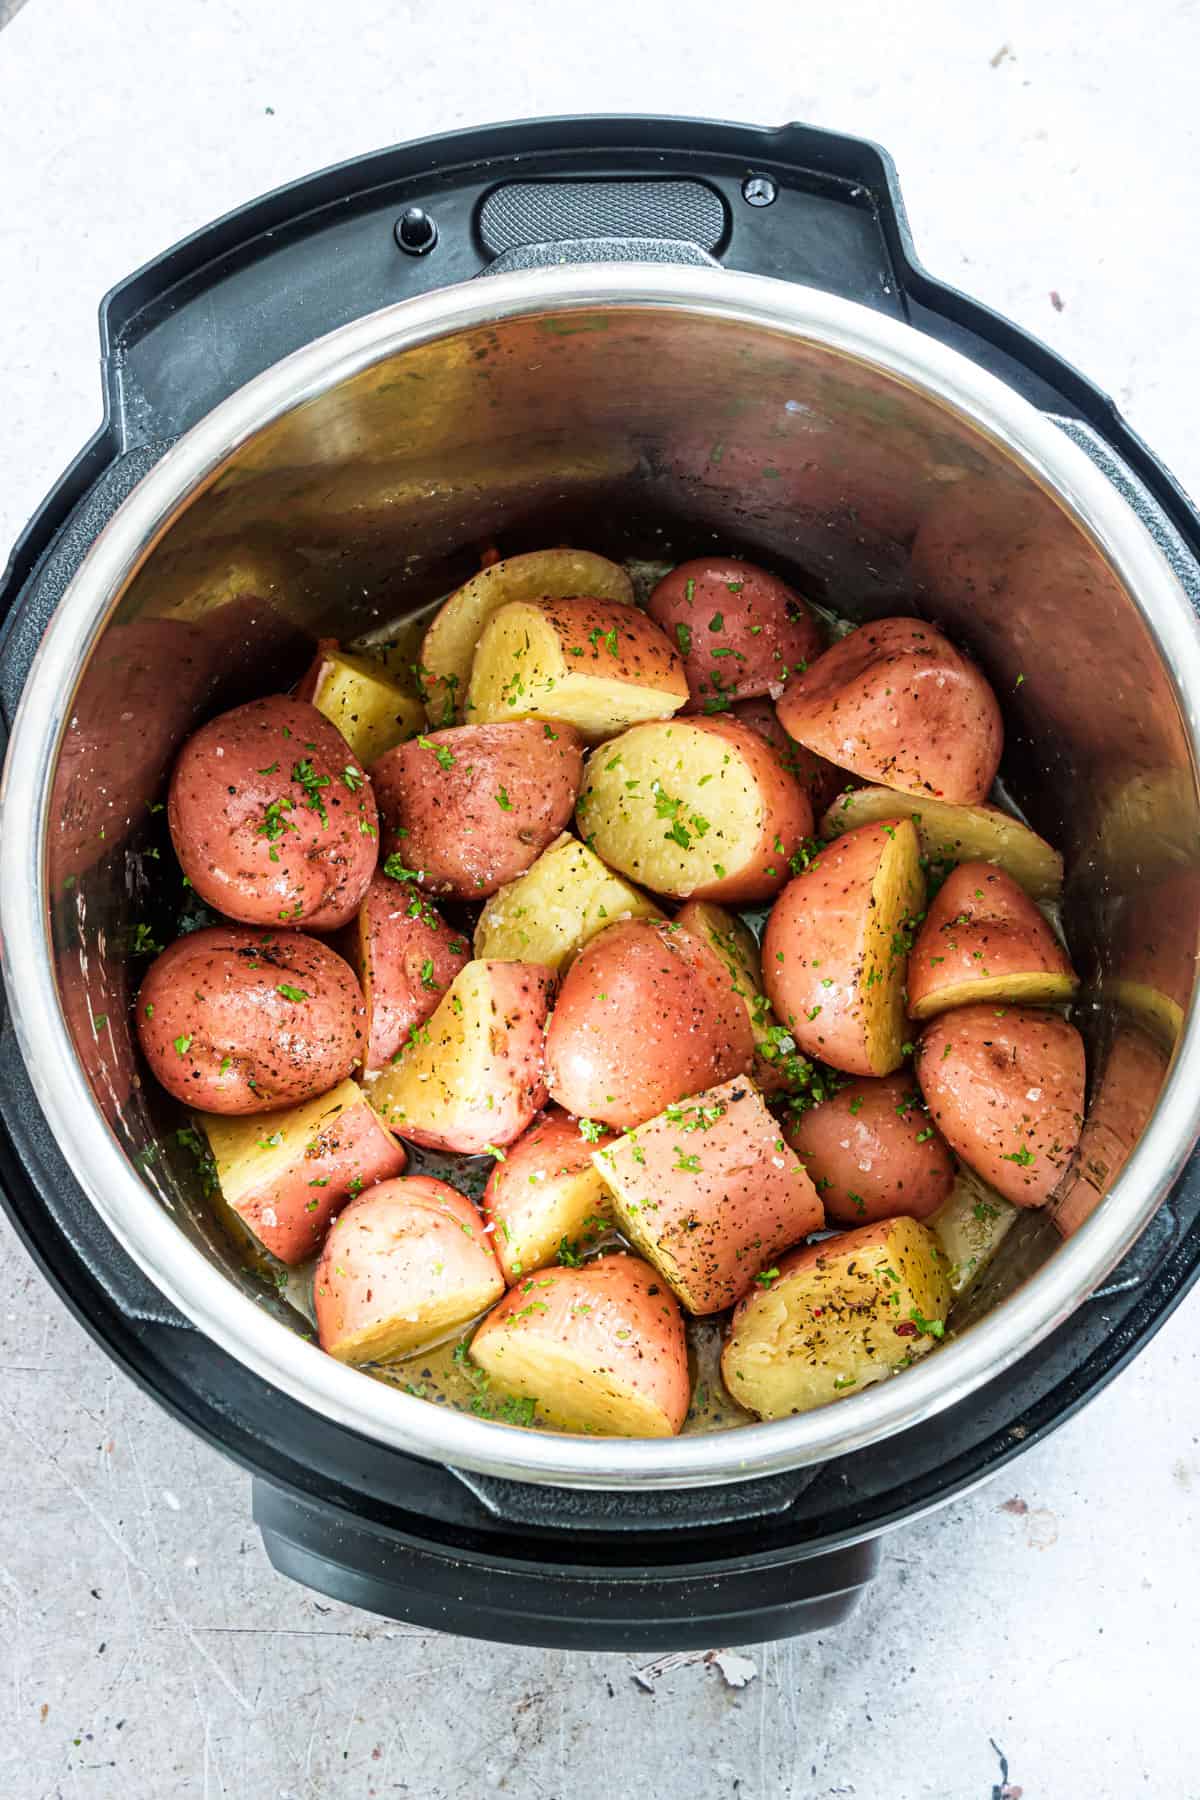 How Long To Cook Potato Cubes In An Electric Pressure Cooker